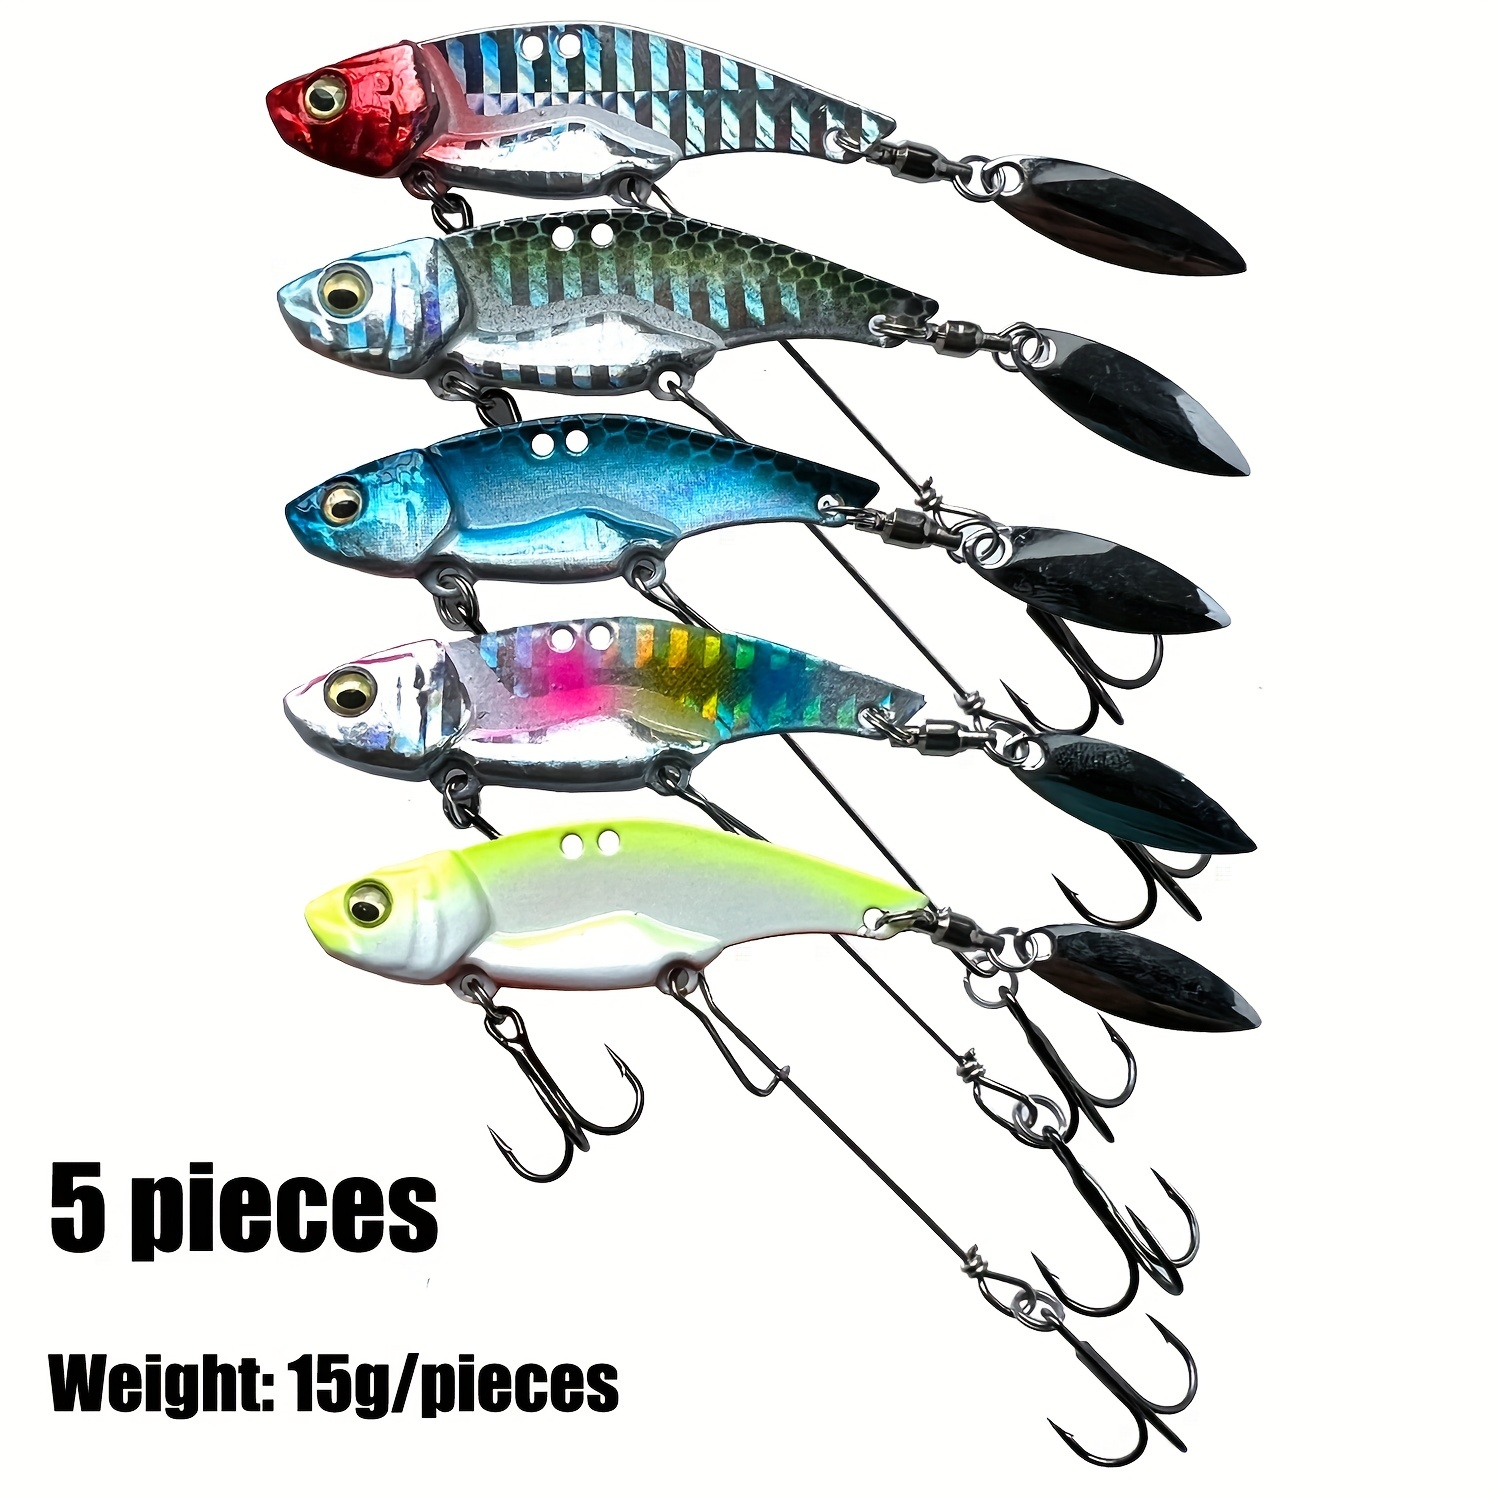 5pcs Metal Vib Lipless Fishing Lure - Long Casting, Blade Spinner Bait For  Freshwater And Saltwater Fishing - Hard Bait With Realistic Action